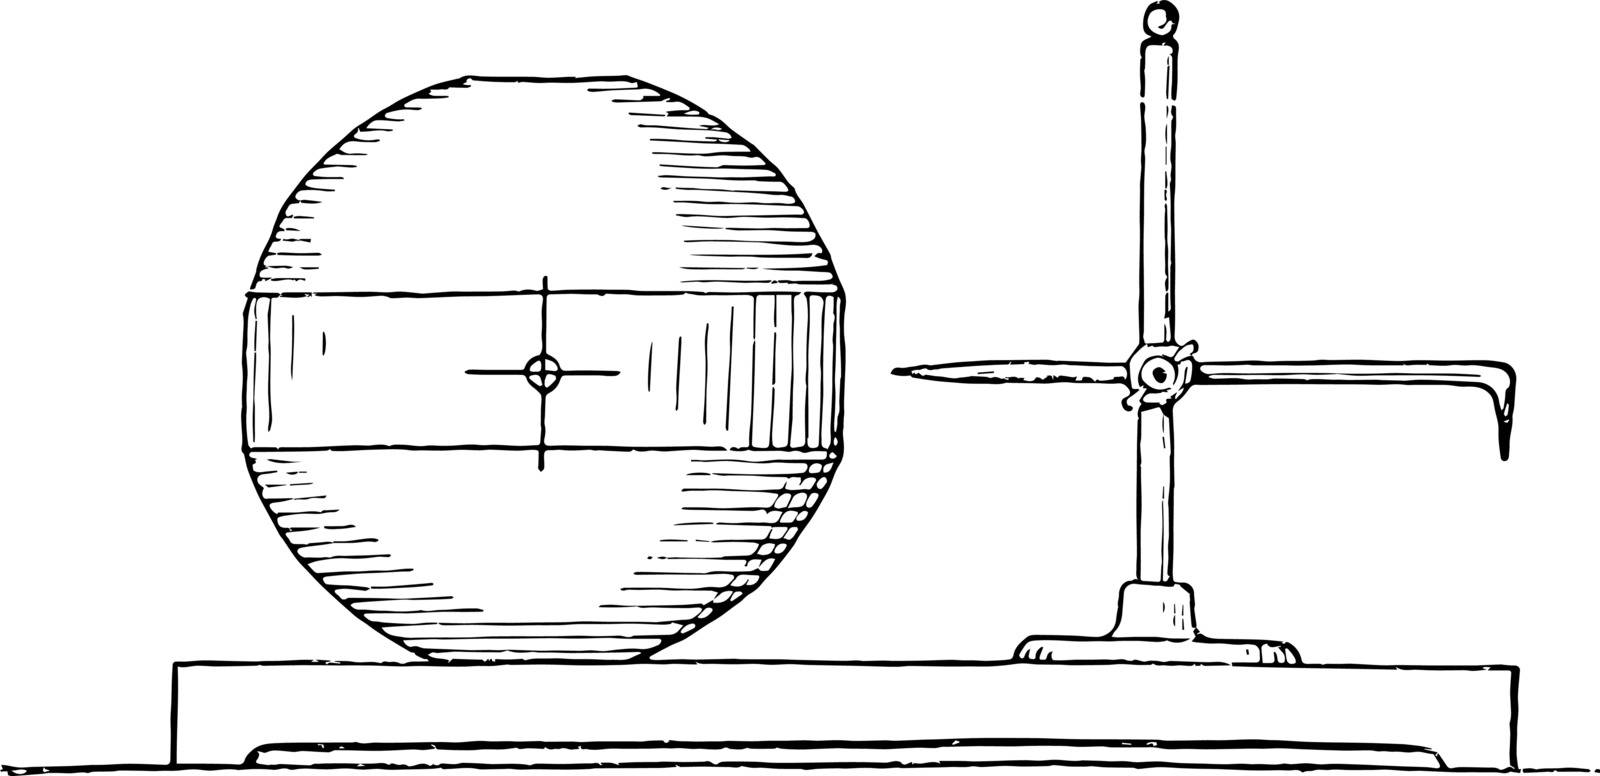 This illustration represents Metal Centrifugal Governor Ball Height Gage which is used to guide the machinists to create the balls in a lathe, vintage line drawing or engraving illustration.